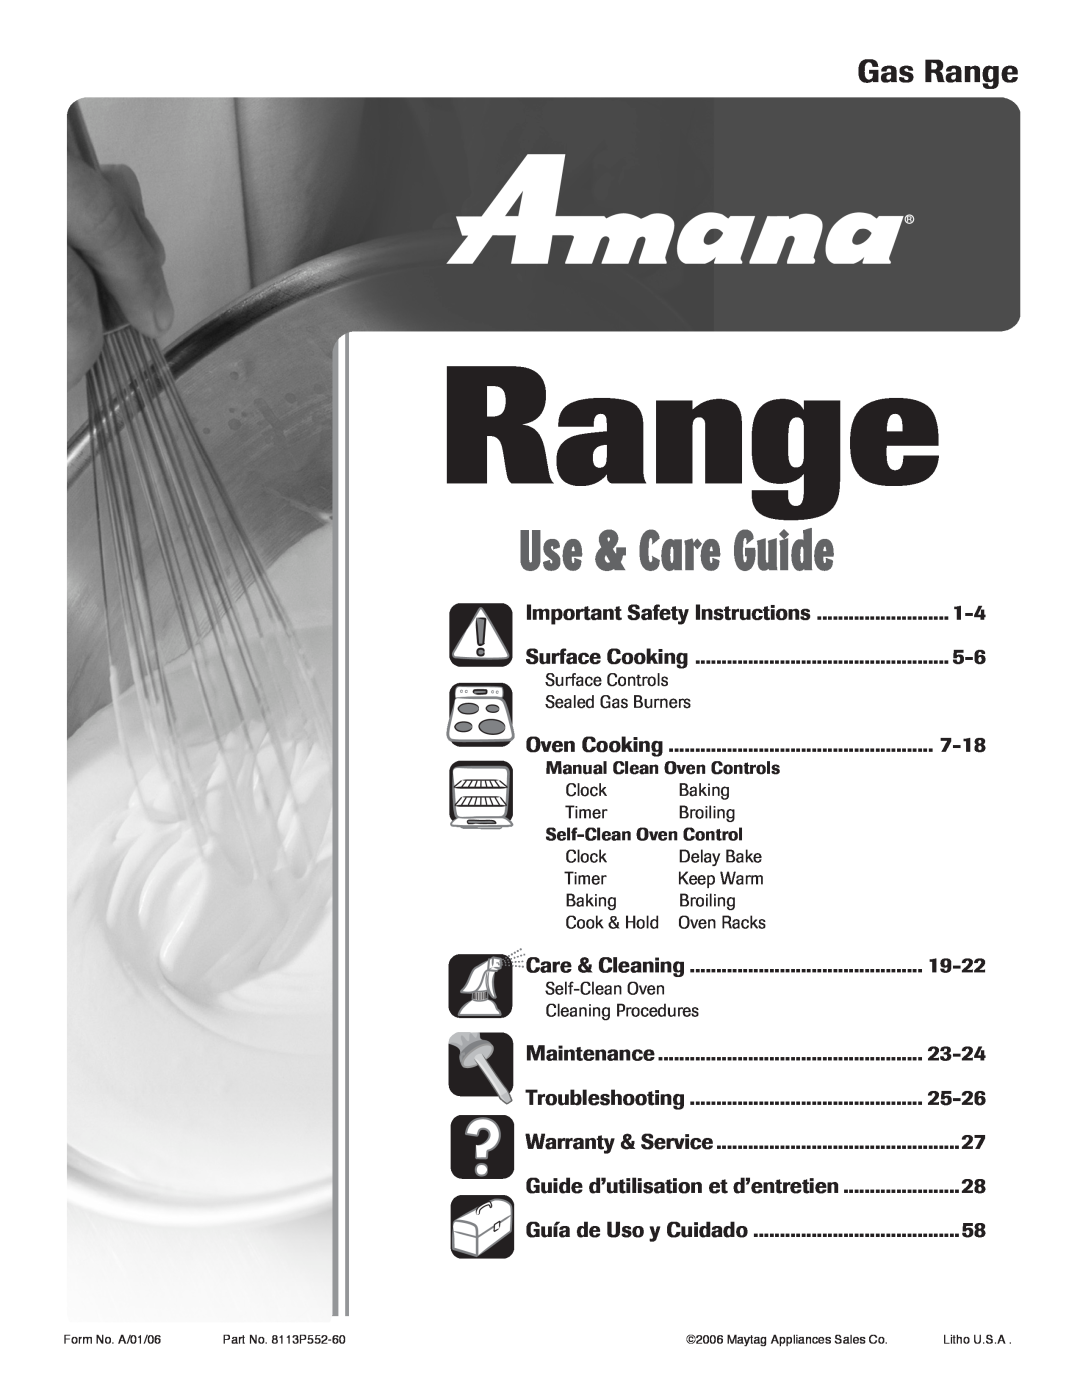 Amana pmn important safety instructions Gas Range, Use & Care Guide 